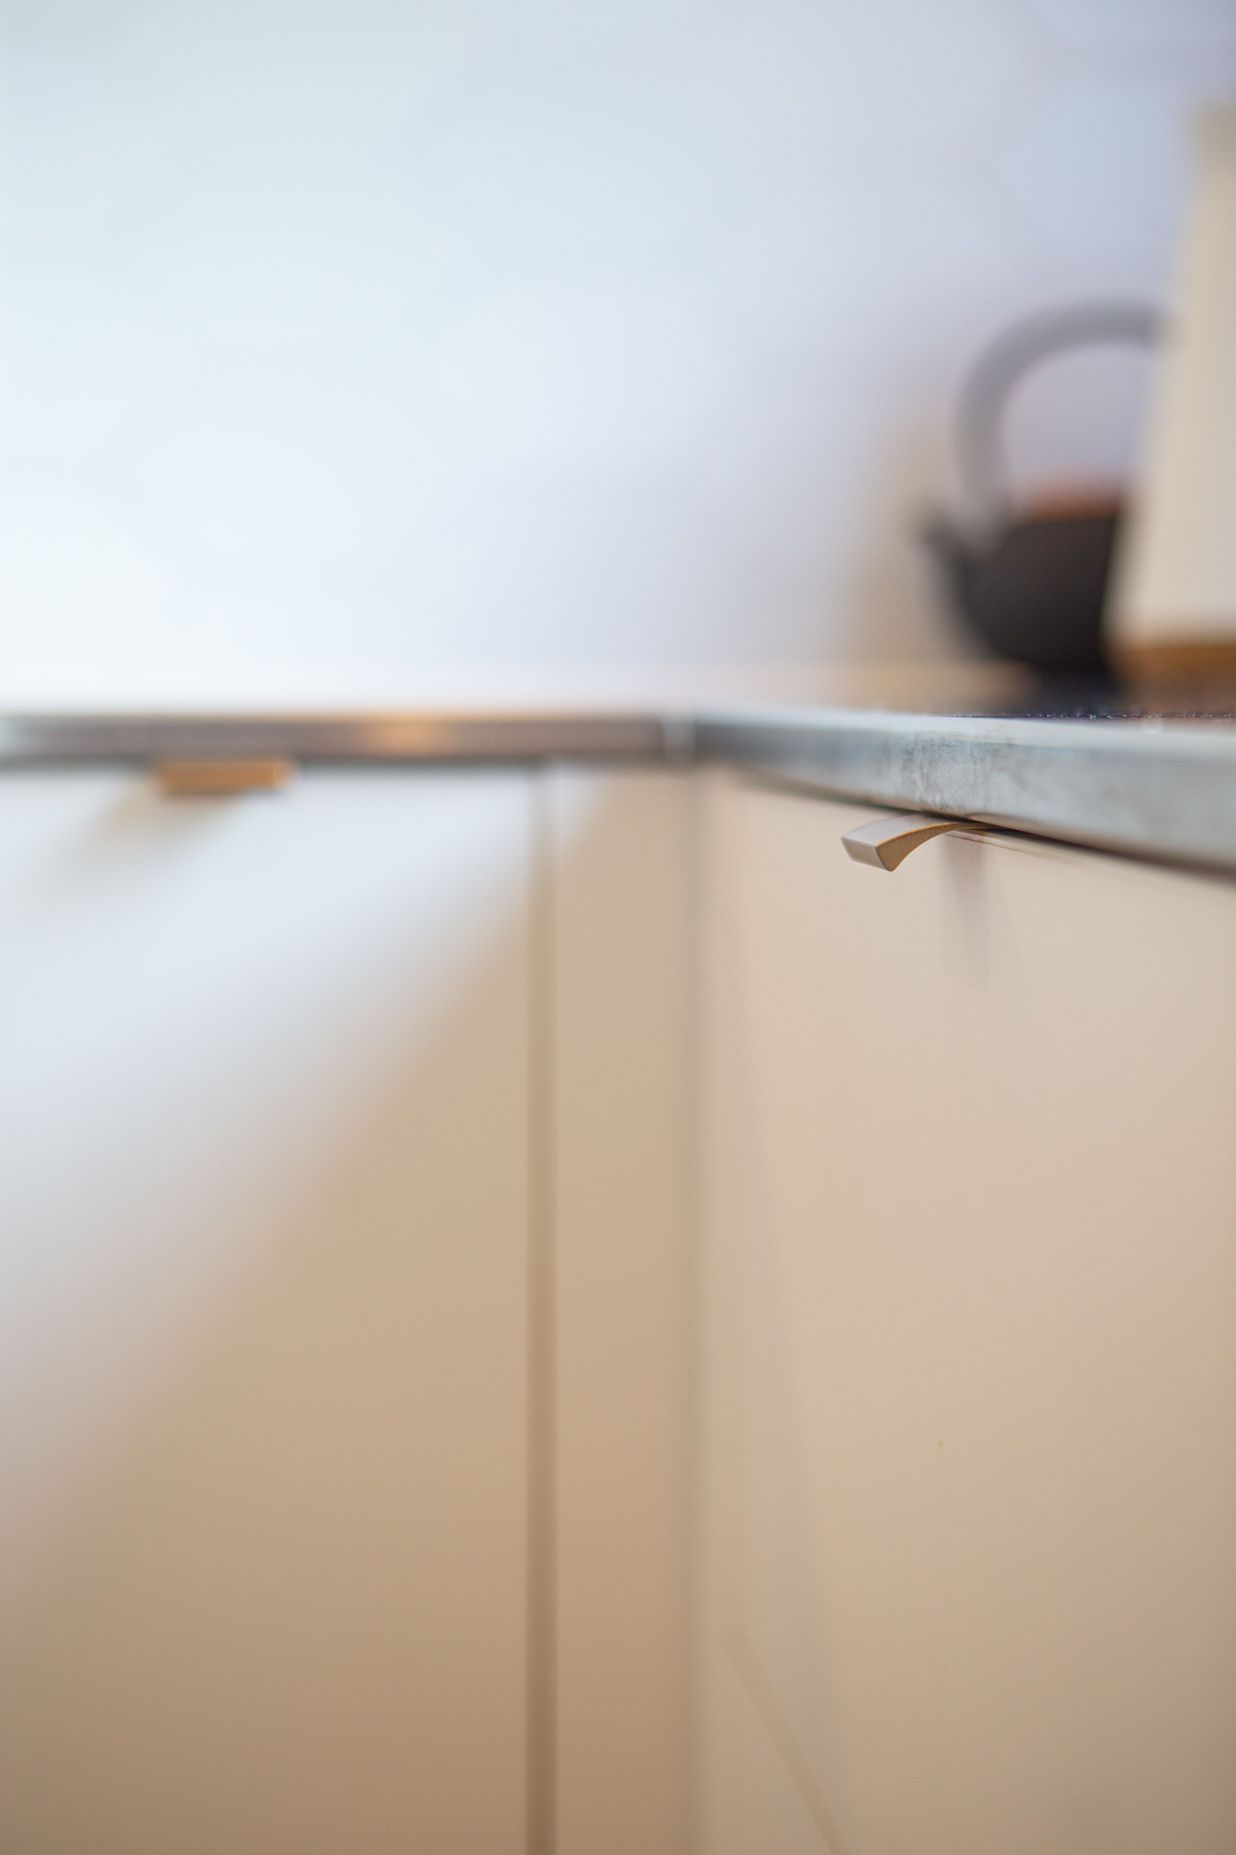 Brass cabinet pulls were perfect for a small kitchen.